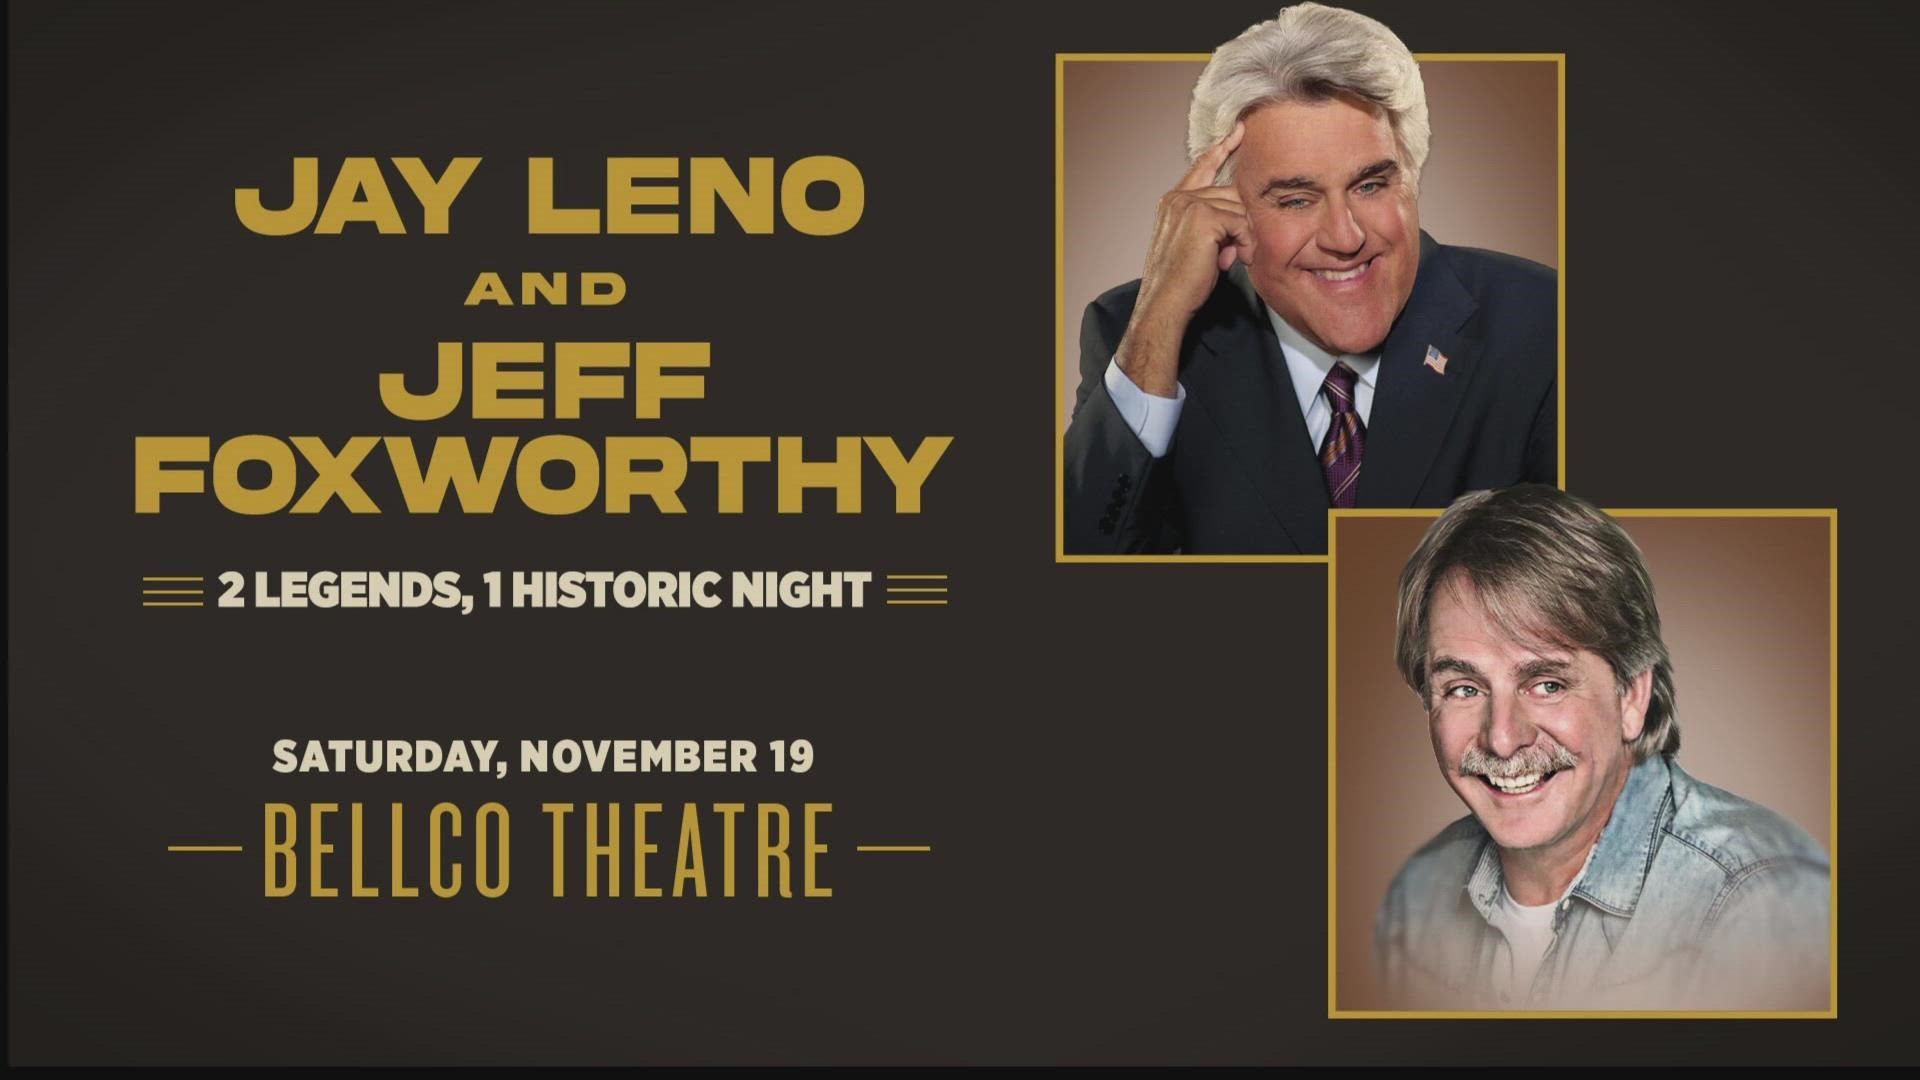 Jay Leno and Jeff Foxworthy will be at The Bellco Theatre on Saturday, November 19.